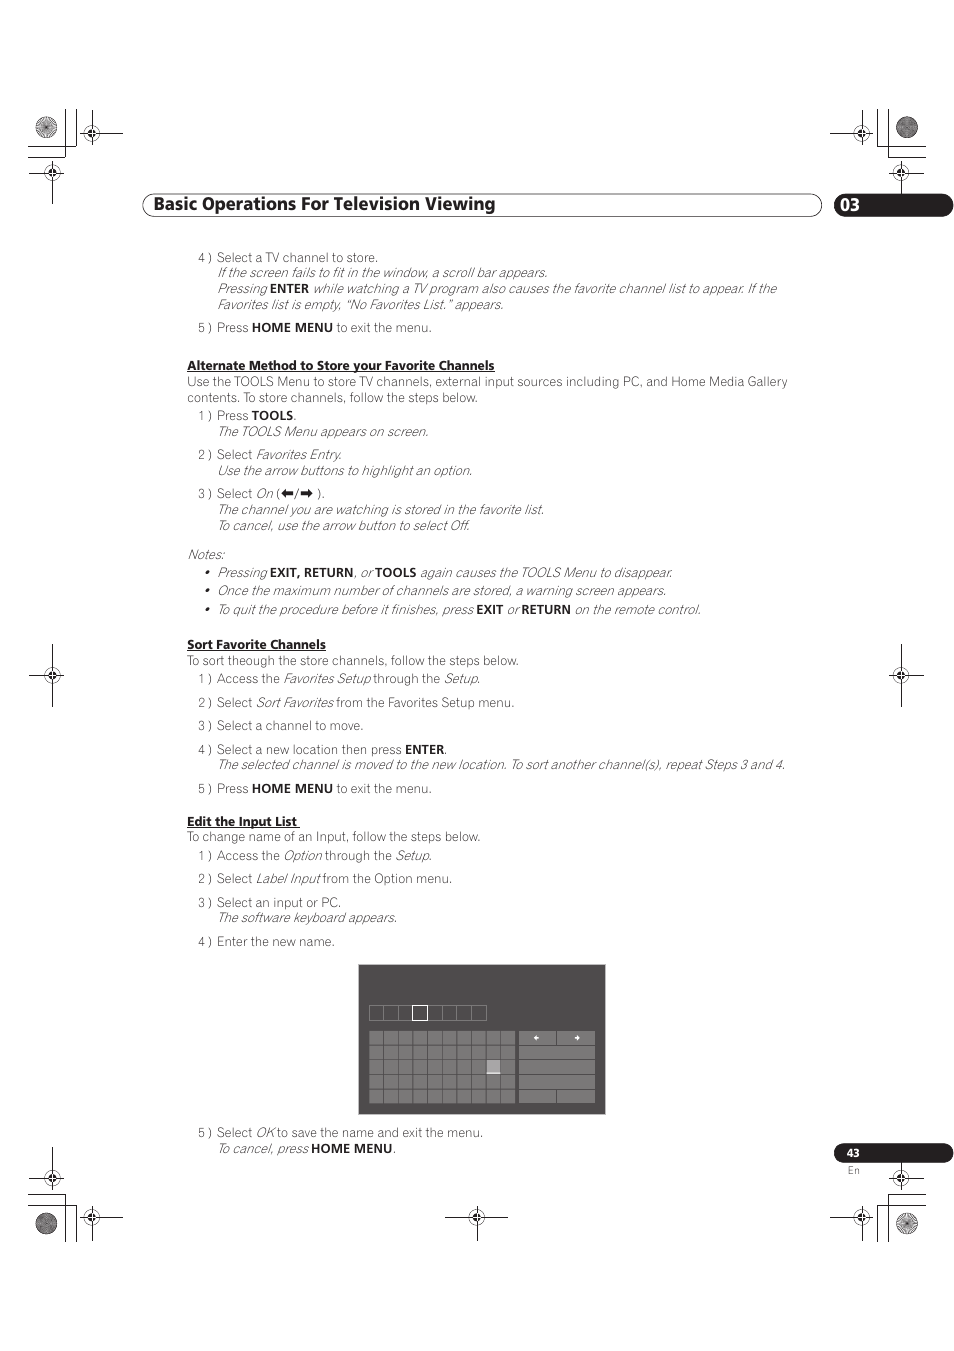 Basic operations for television viewing 03 | Pioneer KURO PRO-151FD Manuel d'utilisation | Page 43 / 167